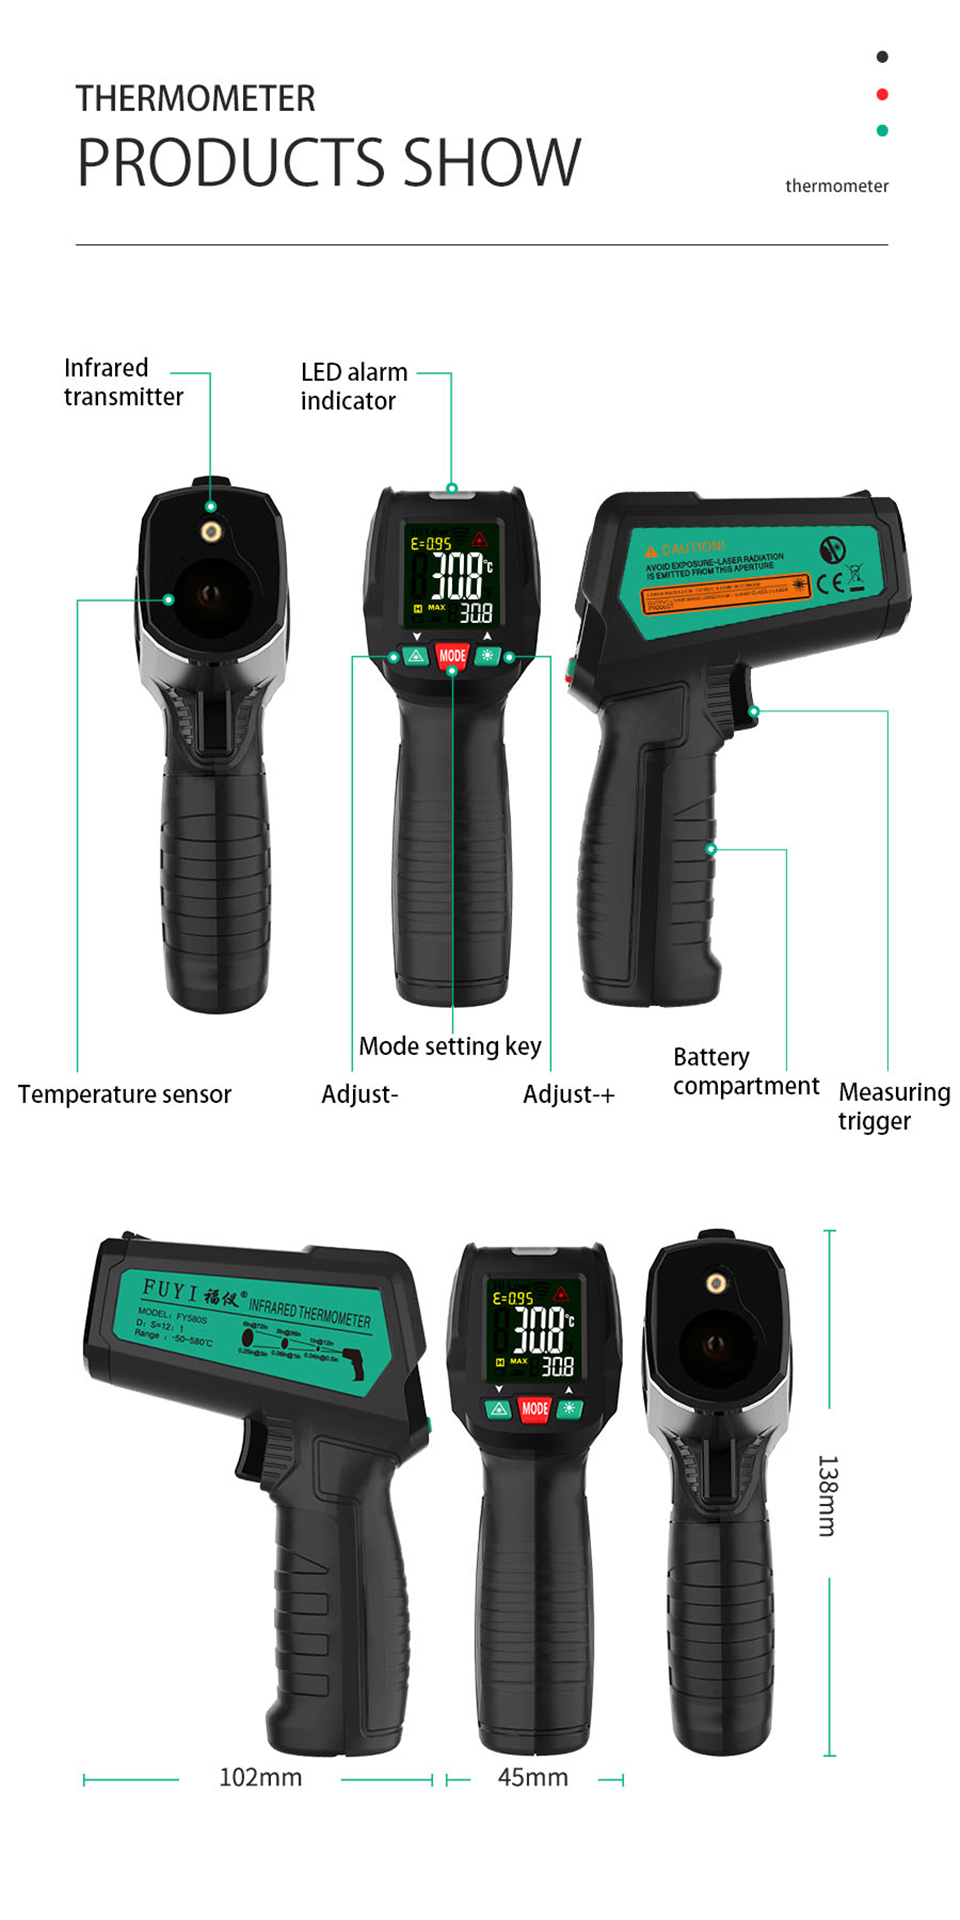 FUYI--50580-Non-Contact-Infrared-Digital-Thermometer-Laser-Handheld-IR-Temperature-Meter-With-K-Type-1758525-25